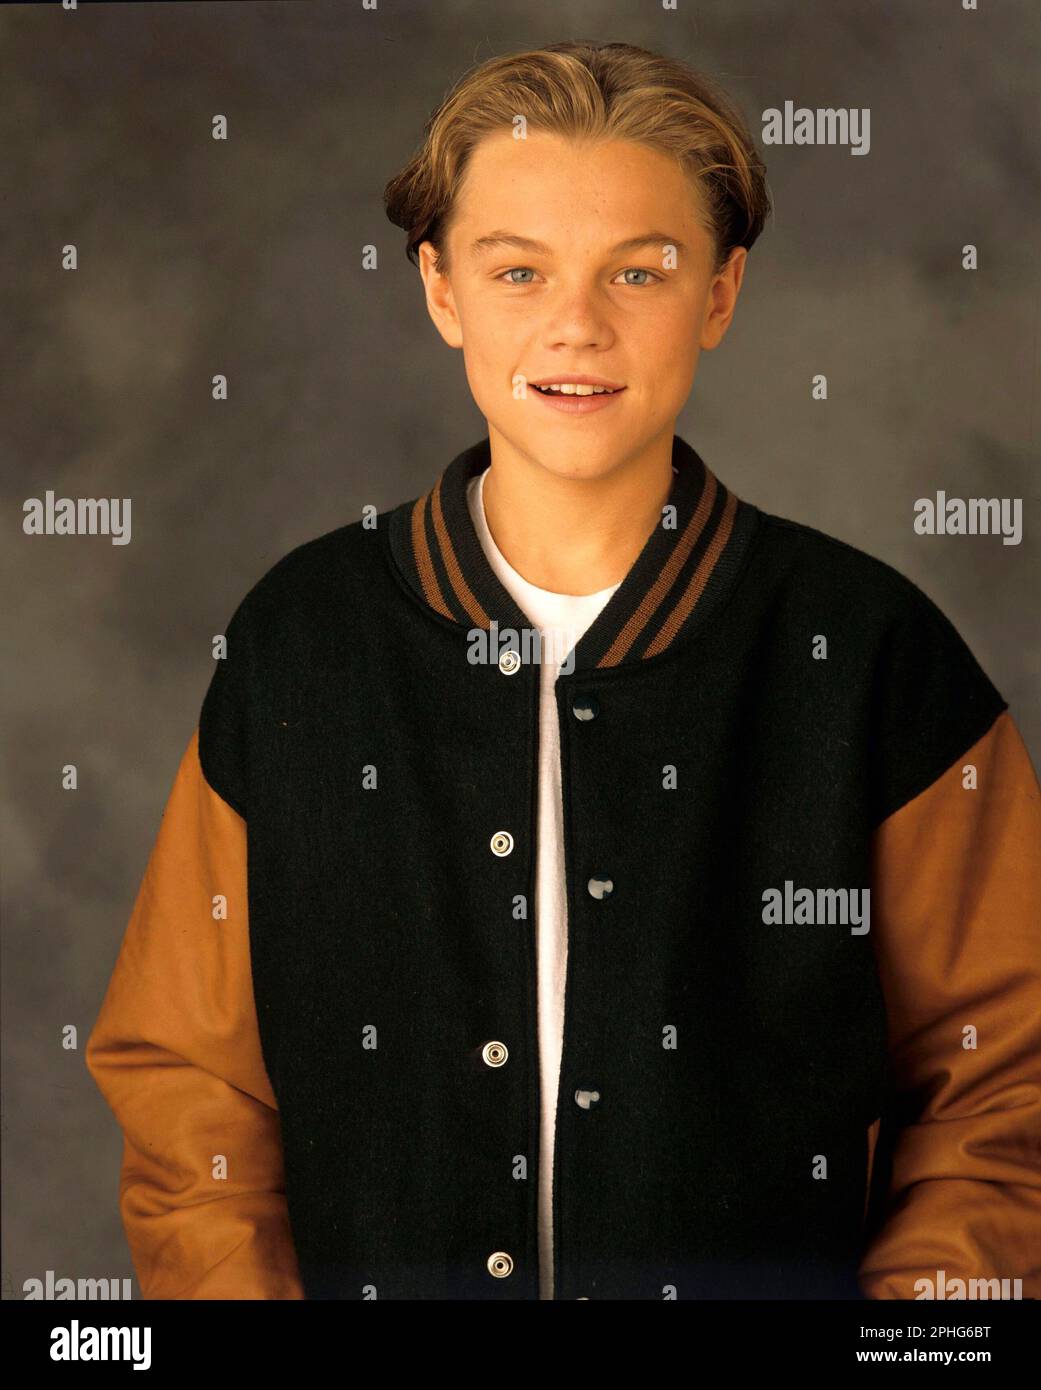 LEONARDO DICAPRIO in GROWING PAINS (1985), directed by JOHN TRACY. Credit: WARNER BROS. TELEVISION / Album Stock Photo